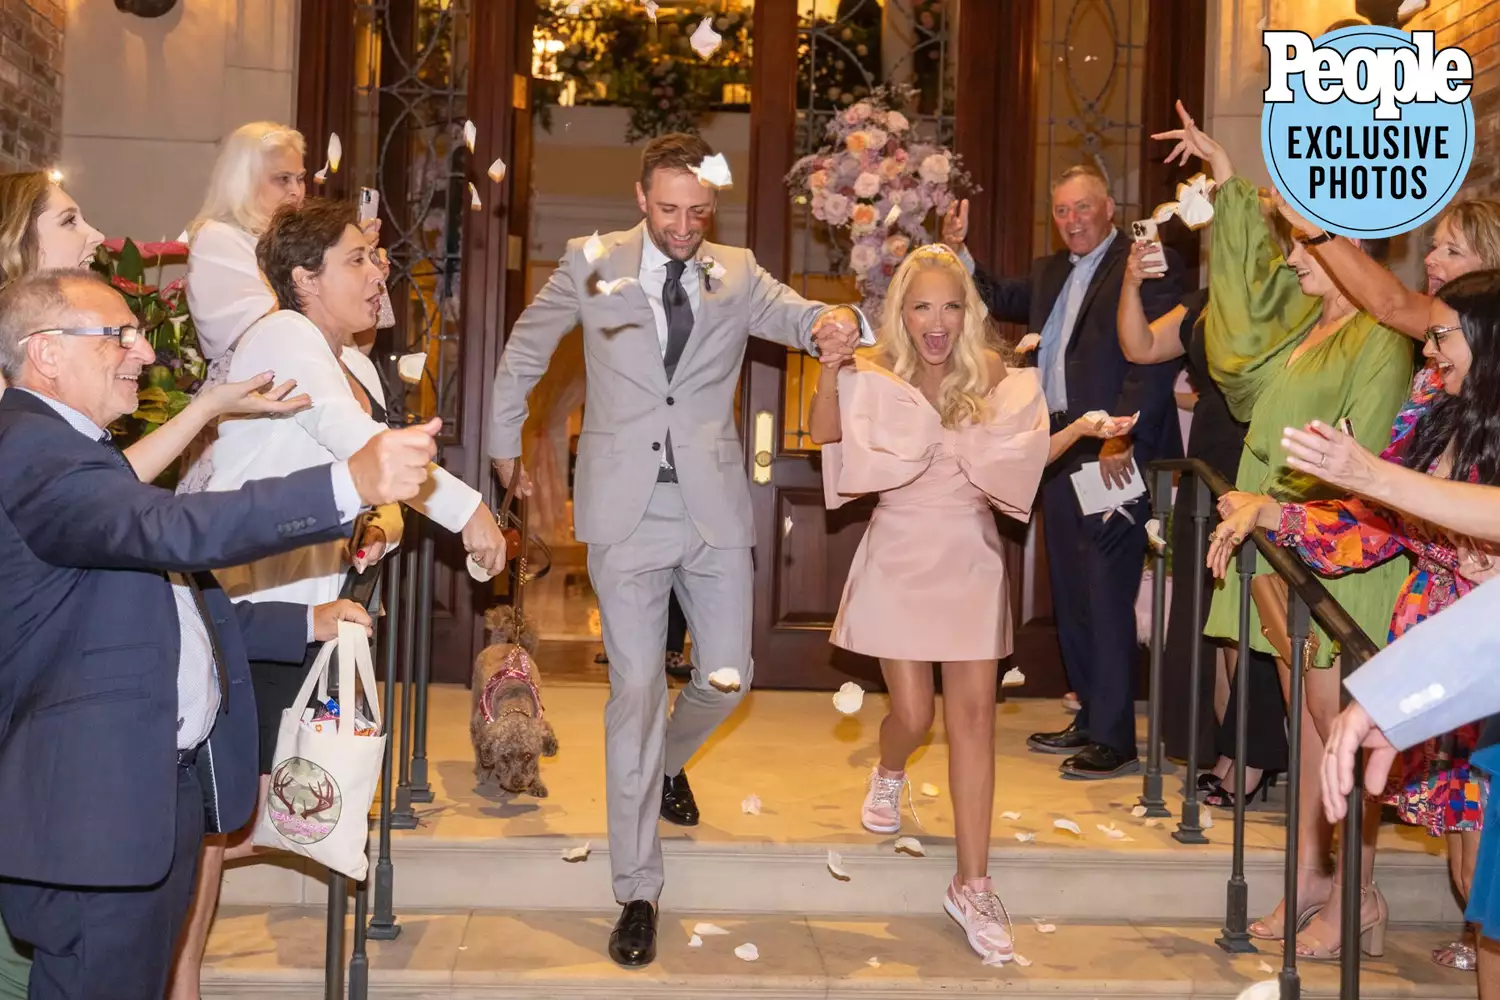 Kristin Chenoweth's wedding dress as she leaves her reception with husband Josh Bryant amidst guests throwing flower petals.